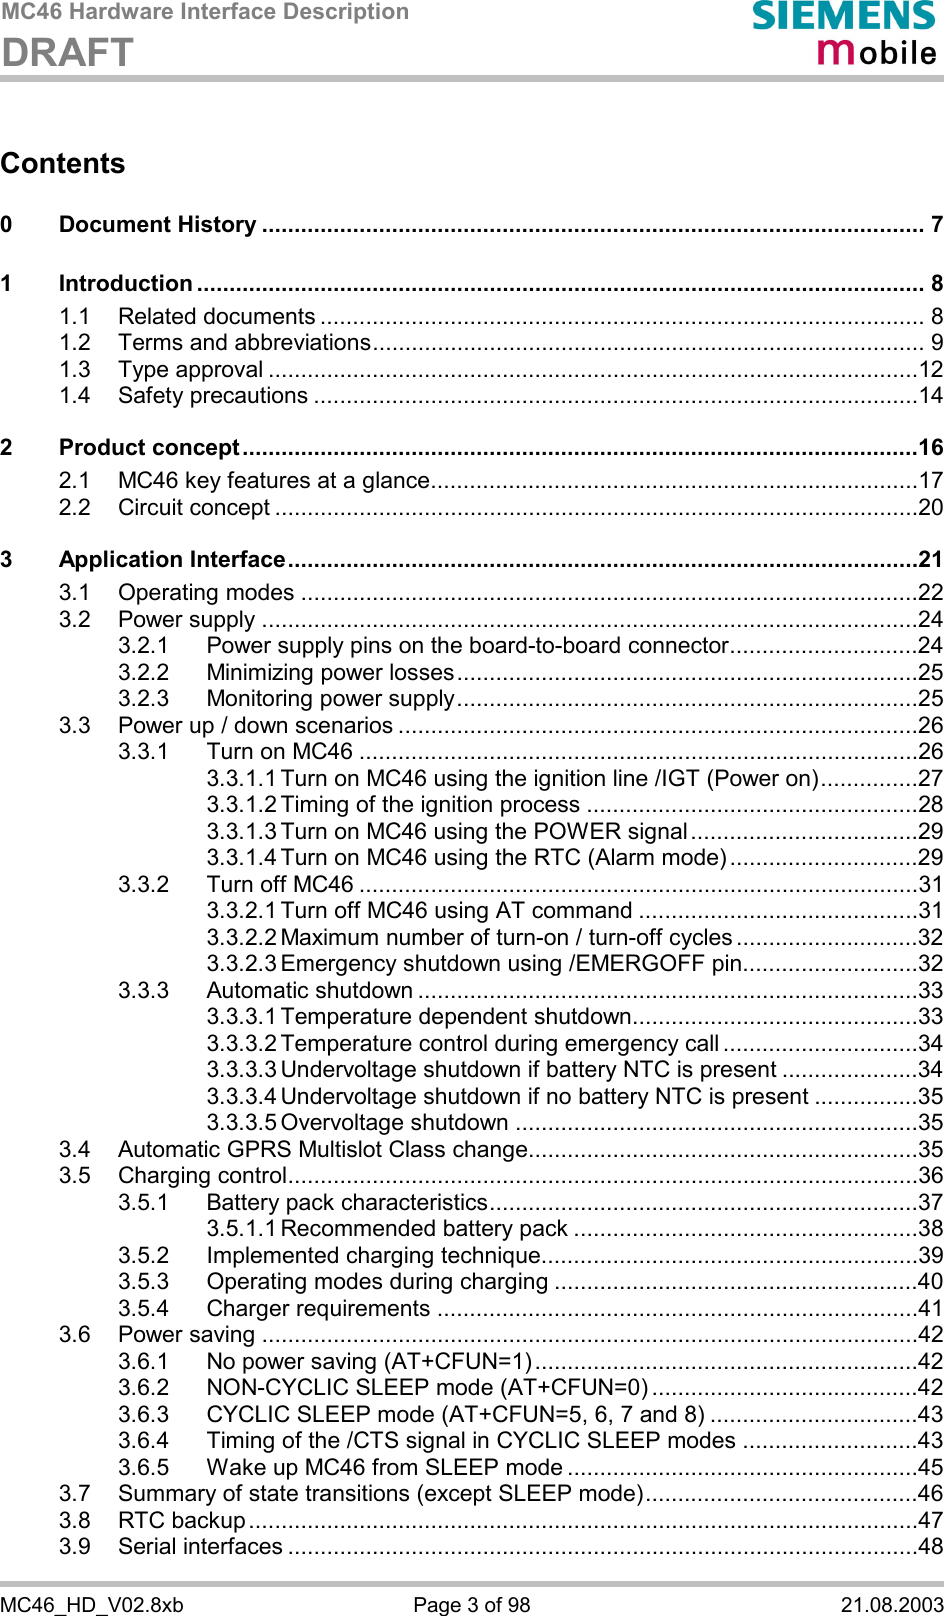 MC46 Hardware Interface Description DRAFT      MC46_HD_V02.8xb  Page 3 of 98  21.08.2003 Contents  0 Document History ...................................................................................................... 7 1 Introduction ................................................................................................................ 8 1.1 Related documents ............................................................................................. 8 1.2 Terms and abbreviations..................................................................................... 9 1.3 Type approval ....................................................................................................12 1.4 Safety precautions .............................................................................................14 2 Product concept........................................................................................................16 2.1 MC46 key features at a glance...........................................................................17 2.2 Circuit concept ...................................................................................................20 3 Application Interface.................................................................................................21 3.1 Operating modes ...............................................................................................22 3.2 Power supply .....................................................................................................24 3.2.1 Power supply pins on the board-to-board connector.............................24 3.2.2 Minimizing power losses.......................................................................25 3.2.3 Monitoring power supply.......................................................................25 3.3 Power up / down scenarios ................................................................................26 3.3.1 Turn on MC46 ......................................................................................26 3.3.1.1 Turn on MC46 using the ignition line /IGT (Power on)...............27 3.3.1.2 Timing of the ignition process ...................................................28 3.3.1.3 Turn on MC46 using the POWER signal...................................29 3.3.1.4 Turn on MC46 using the RTC (Alarm mode).............................29 3.3.2 Turn off MC46 ......................................................................................31 3.3.2.1 Turn off MC46 using AT command ...........................................31 3.3.2.2 Maximum number of turn-on / turn-off cycles ............................32 3.3.2.3 Emergency shutdown using /EMERGOFF pin...........................32 3.3.3 Automatic shutdown .............................................................................33 3.3.3.1 Temperature dependent shutdown............................................33 3.3.3.2 Temperature control during emergency call ..............................34 3.3.3.3 Undervoltage shutdown if battery NTC is present .....................34 3.3.3.4 Undervoltage shutdown if no battery NTC is present ................35 3.3.3.5 Overvoltage shutdown ..............................................................35 3.4 Automatic GPRS Multislot Class change............................................................35 3.5 Charging control.................................................................................................36 3.5.1 Battery pack characteristics..................................................................37 3.5.1.1 Recommended battery pack .....................................................38 3.5.2 Implemented charging technique..........................................................39 3.5.3 Operating modes during charging ........................................................40 3.5.4 Charger requirements ..........................................................................41 3.6 Power saving .....................................................................................................42 3.6.1 No power saving (AT+CFUN=1)...........................................................42 3.6.2 NON-CYCLIC SLEEP mode (AT+CFUN=0) .........................................42 3.6.3 CYCLIC SLEEP mode (AT+CFUN=5, 6, 7 and 8) ................................43 3.6.4 Timing of the /CTS signal in CYCLIC SLEEP modes ...........................43 3.6.5 Wake up MC46 from SLEEP mode ......................................................45 3.7 Summary of state transitions (except SLEEP mode)..........................................46 3.8 RTC backup.......................................................................................................47 3.9 Serial interfaces .................................................................................................48 